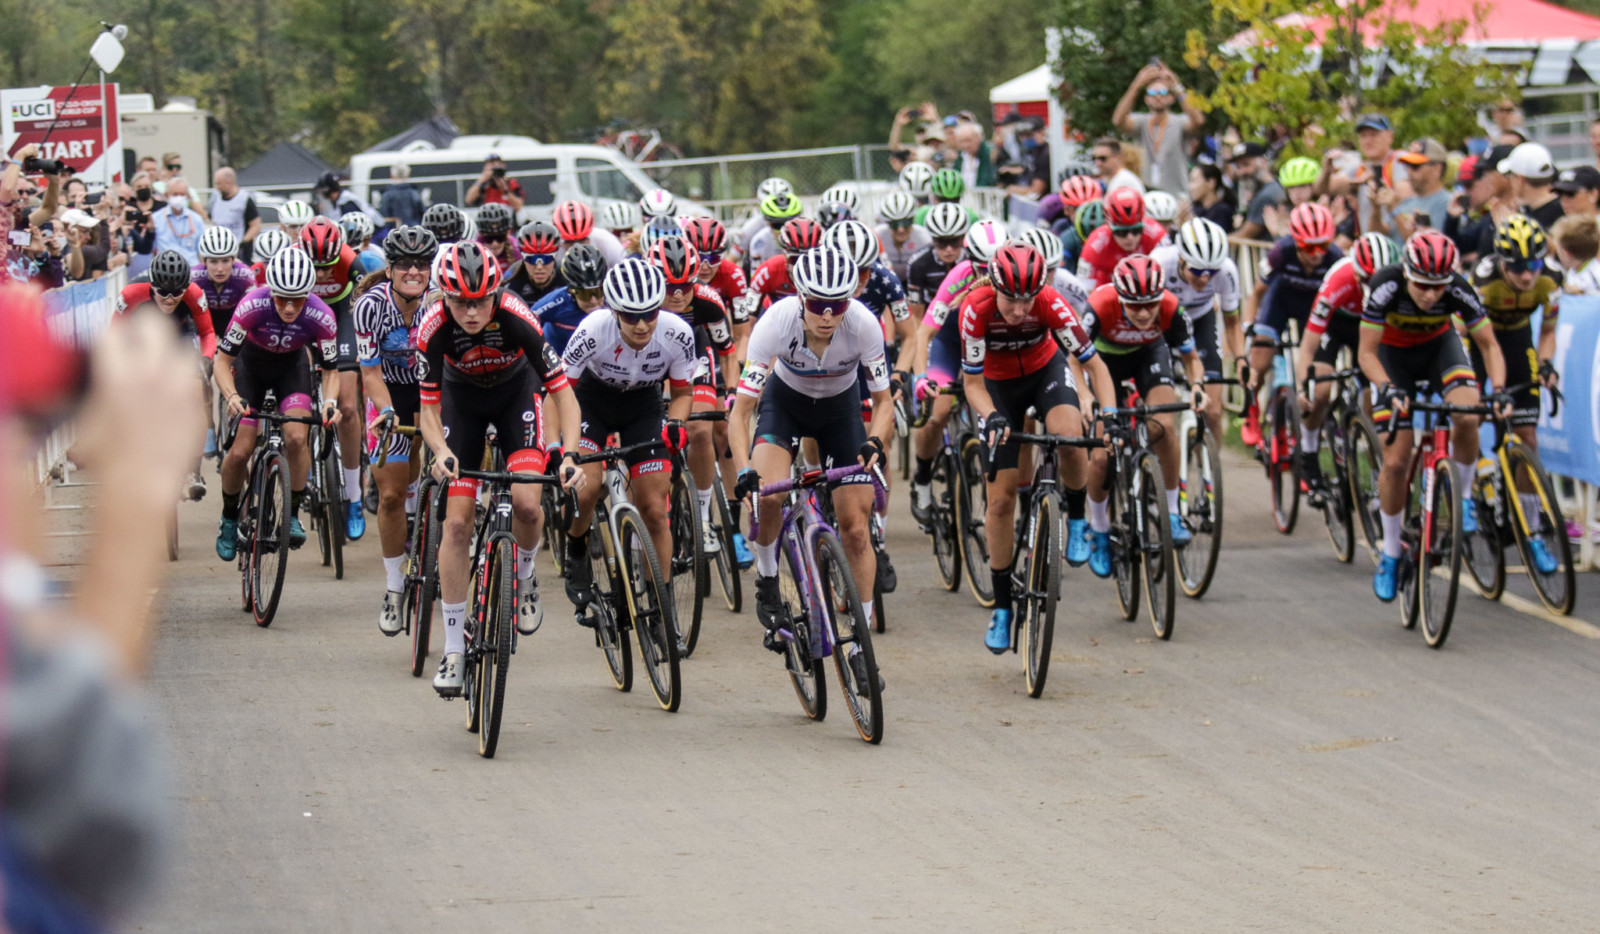 2021 Tabor Cyclocross World Cup Results: Elite Women